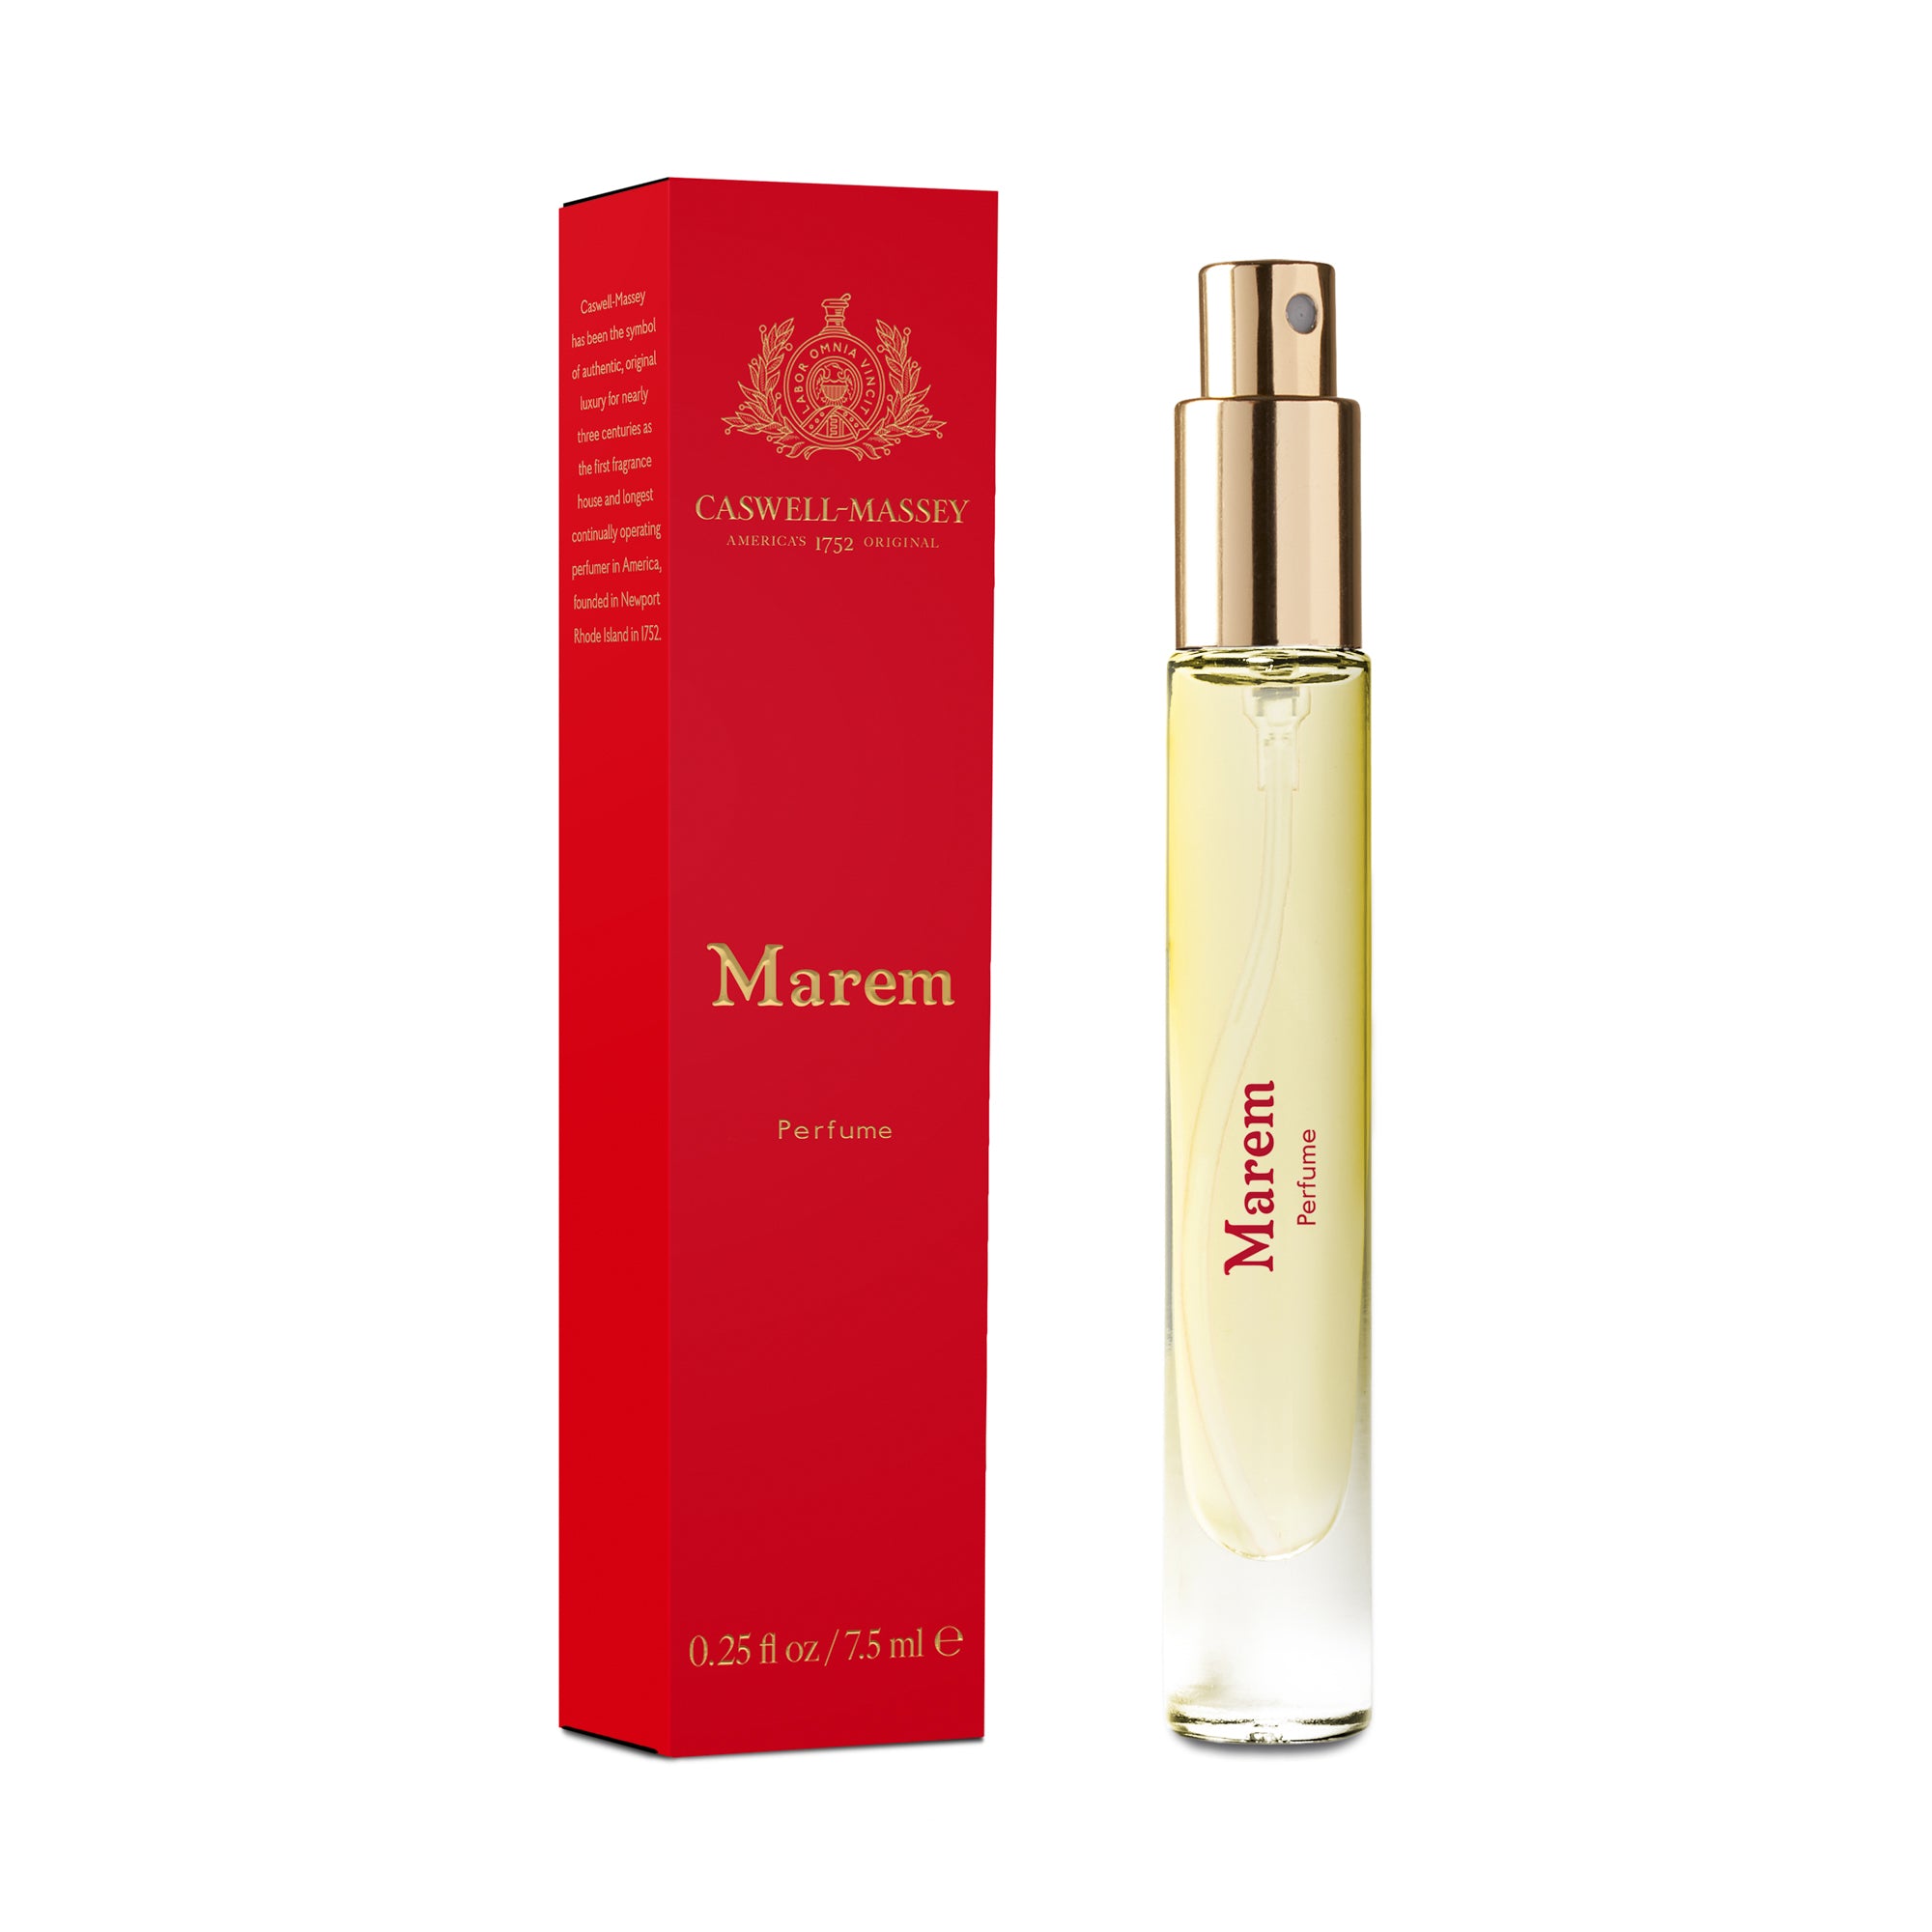 MAREM Perfume by Caswell-Massey, fine fragrance for women, 7.5mL Discovery Size